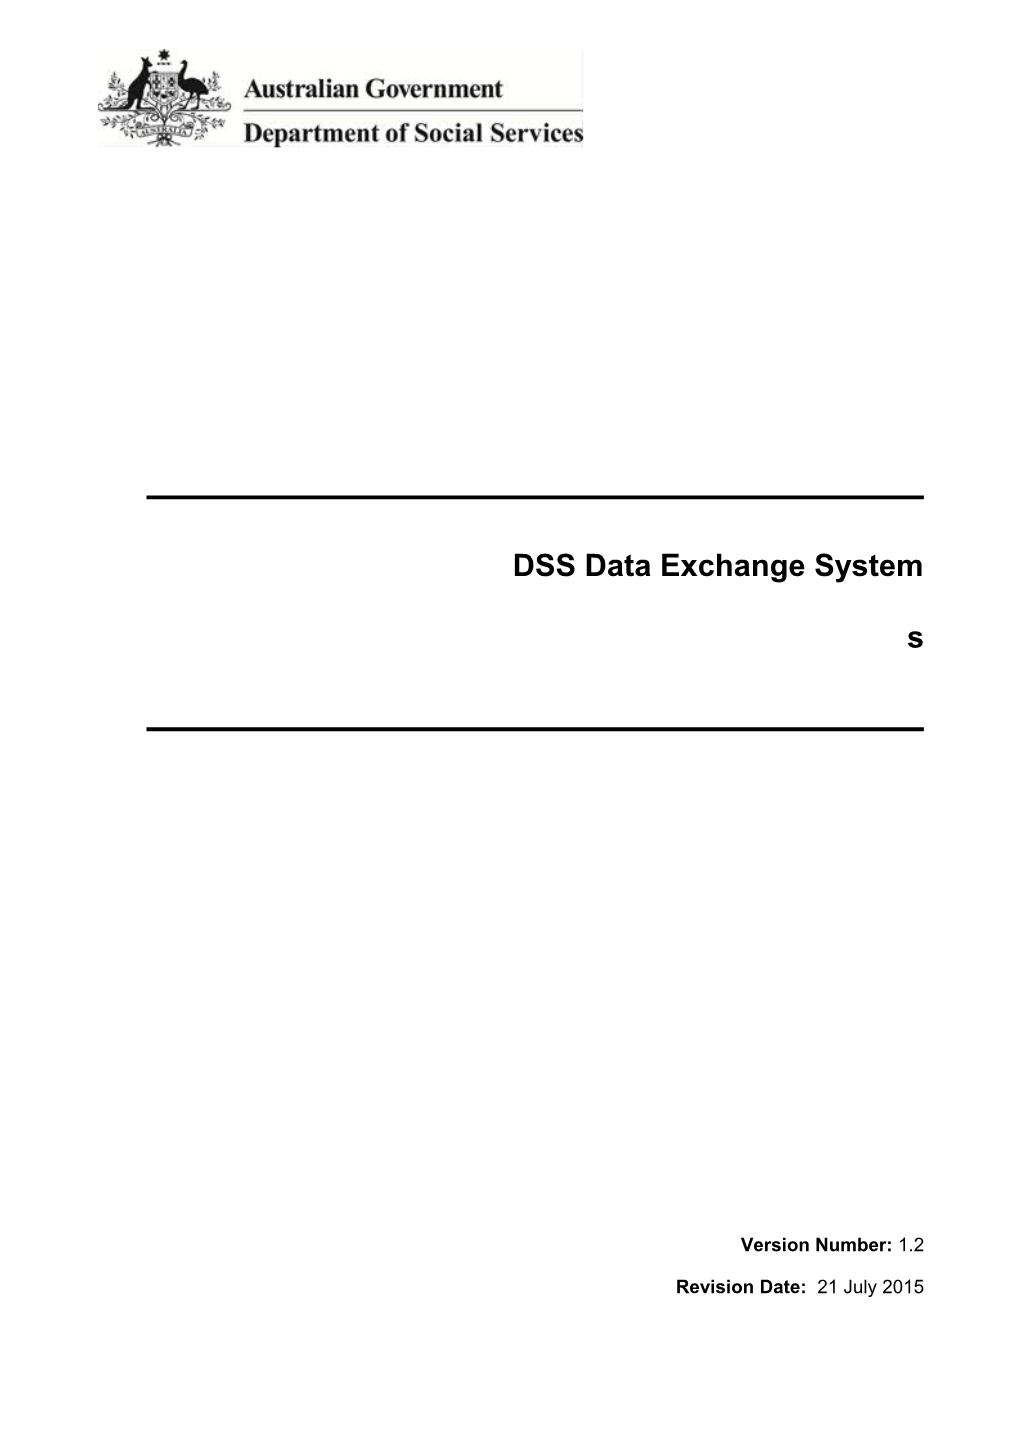 DSS Data Exchange System Web Service Technical Specification